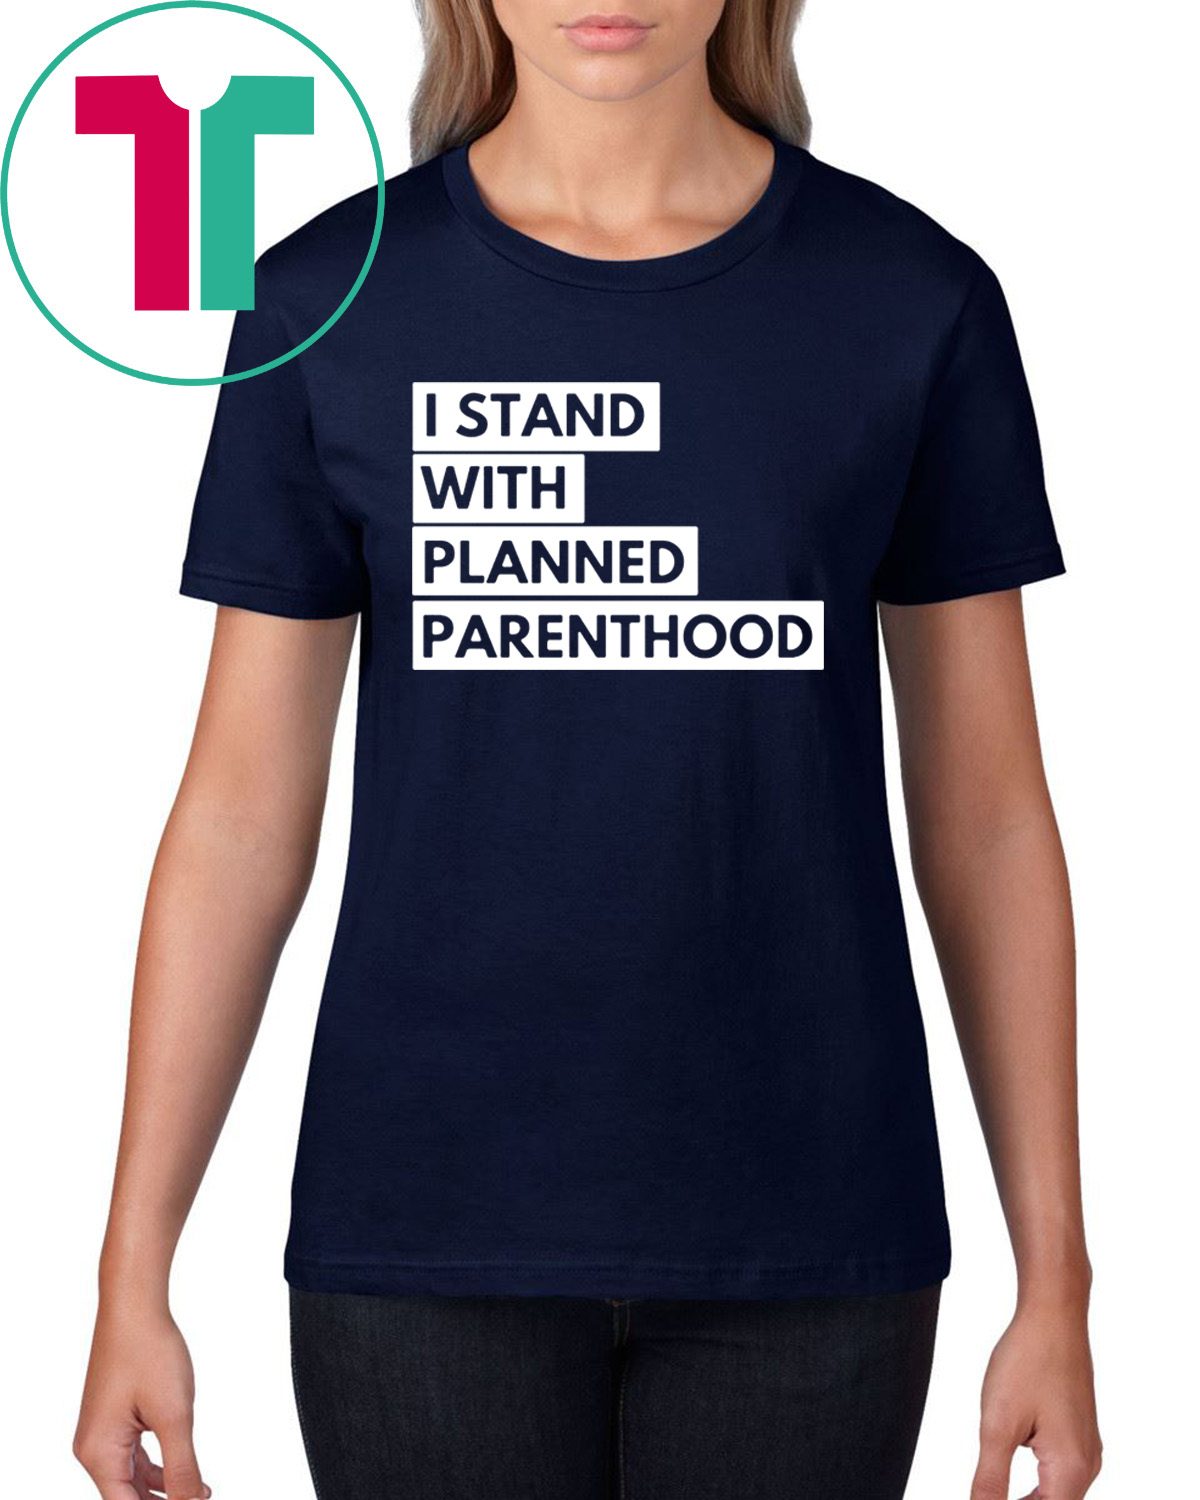 I Stand With Planned Parenthood Shirt - Reviewshirts Office